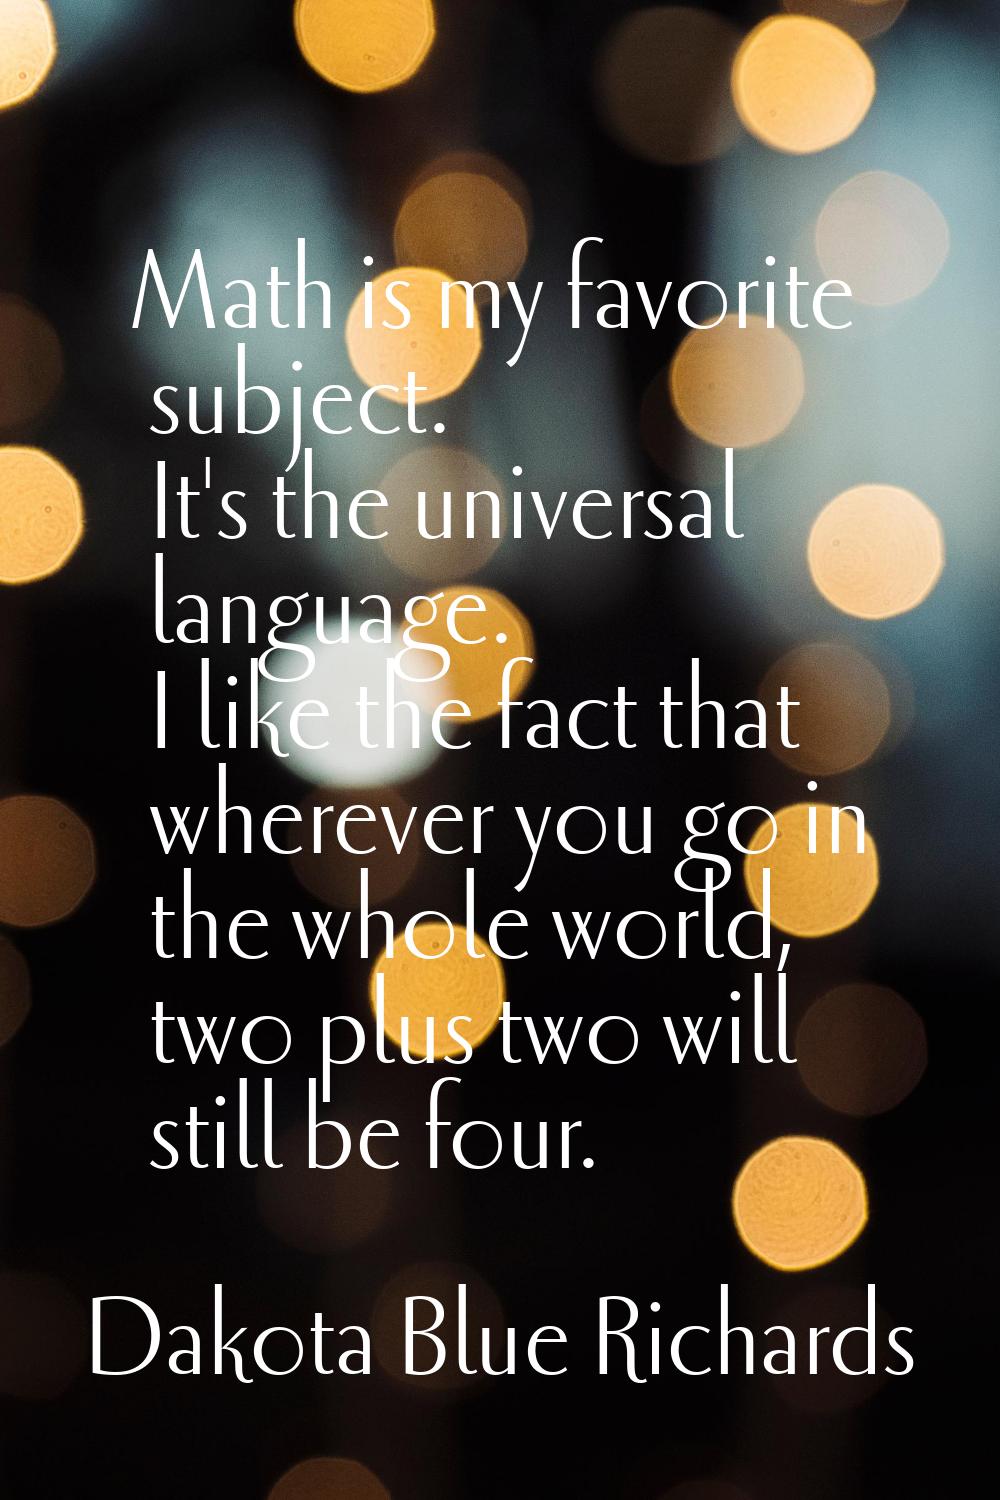 Math is my favorite subject. It's the universal language. I like the fact that wherever you go in t